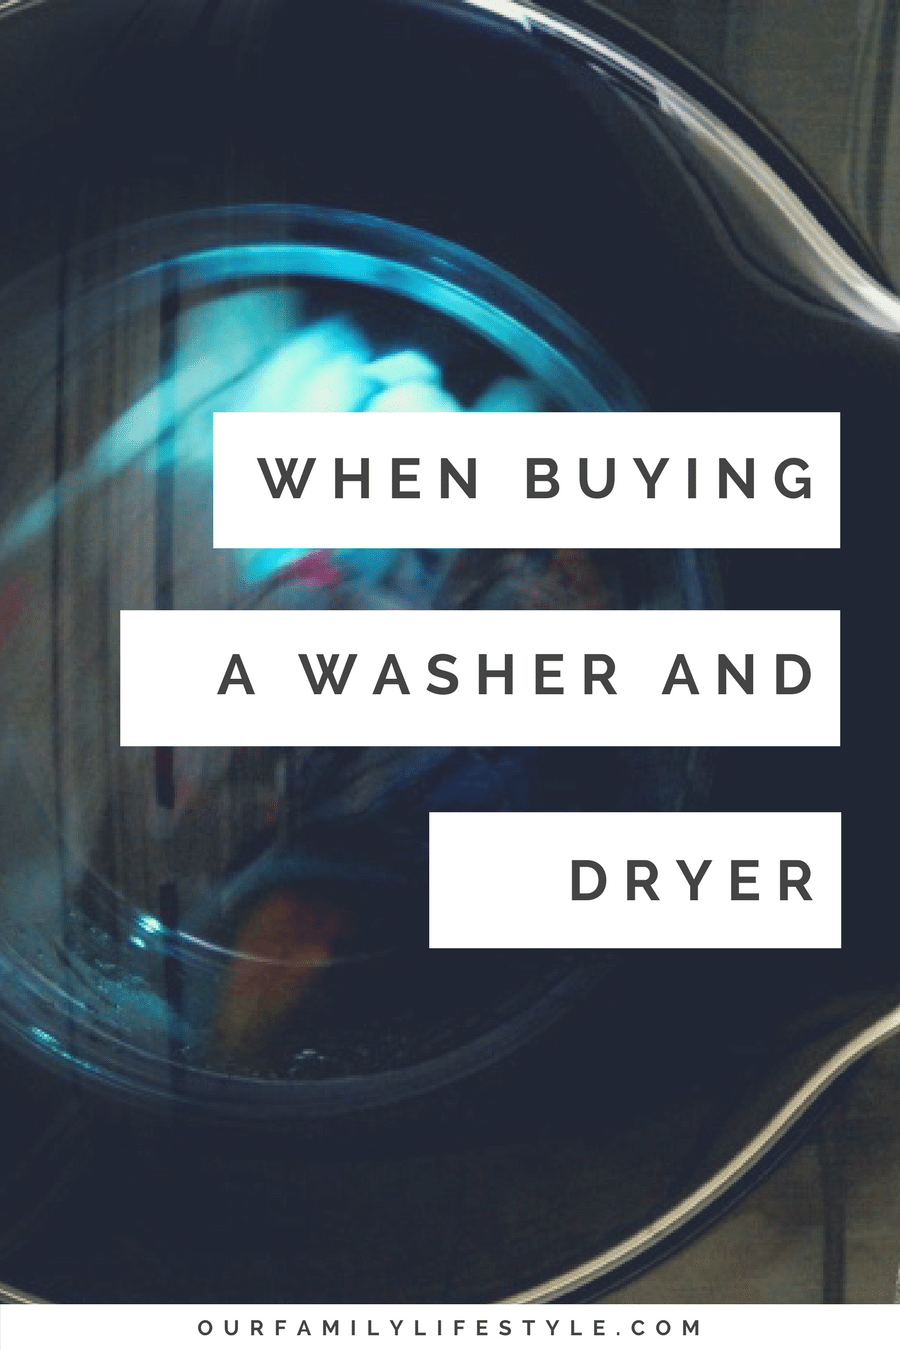 Things to Consider When Buying a Washer & Dryer